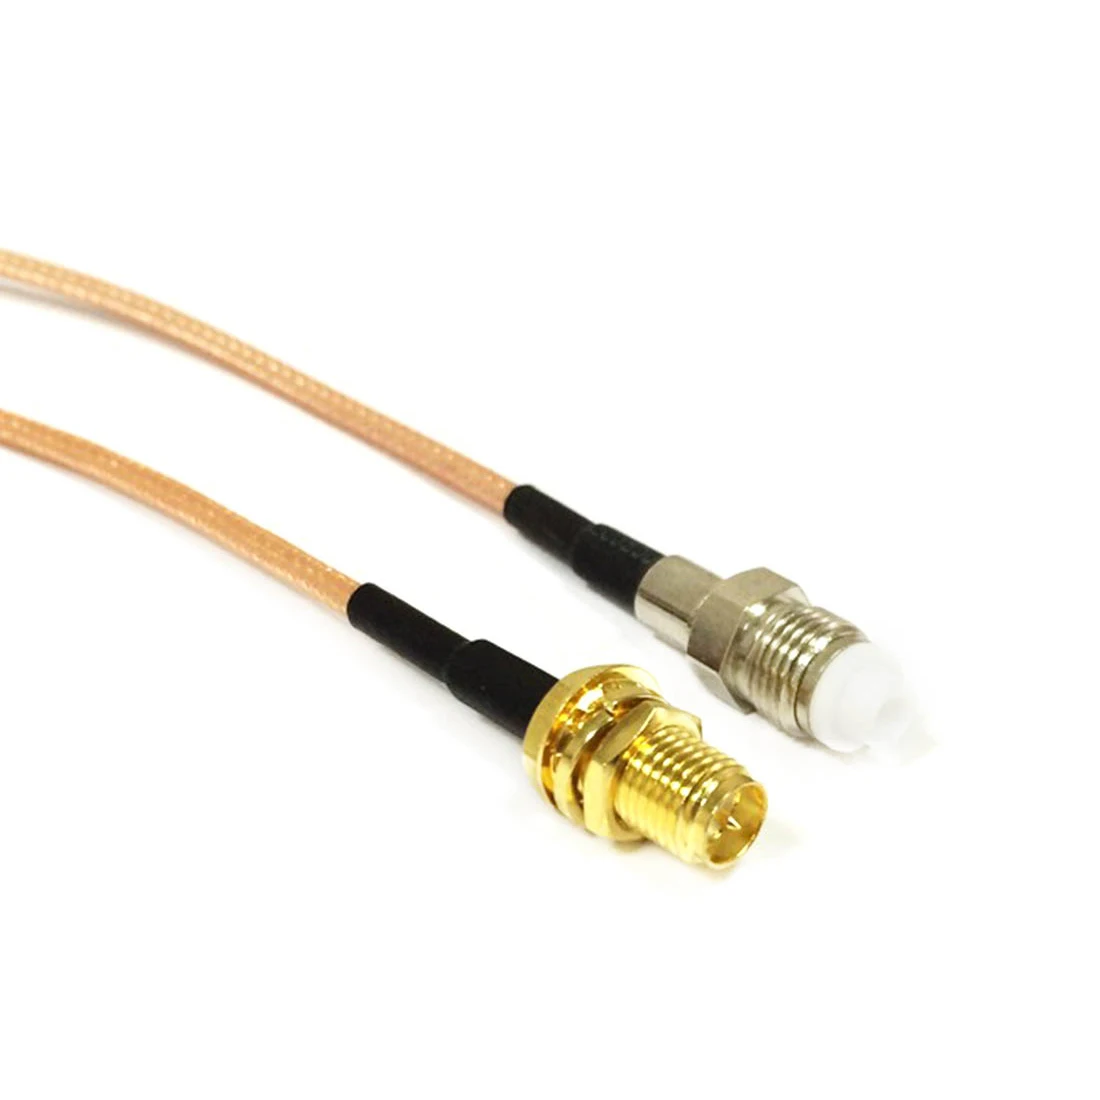 

RP SMA Female Jack to FME Female Jack RG316 Coaxial Cable 15cm 6inch Extension Cable